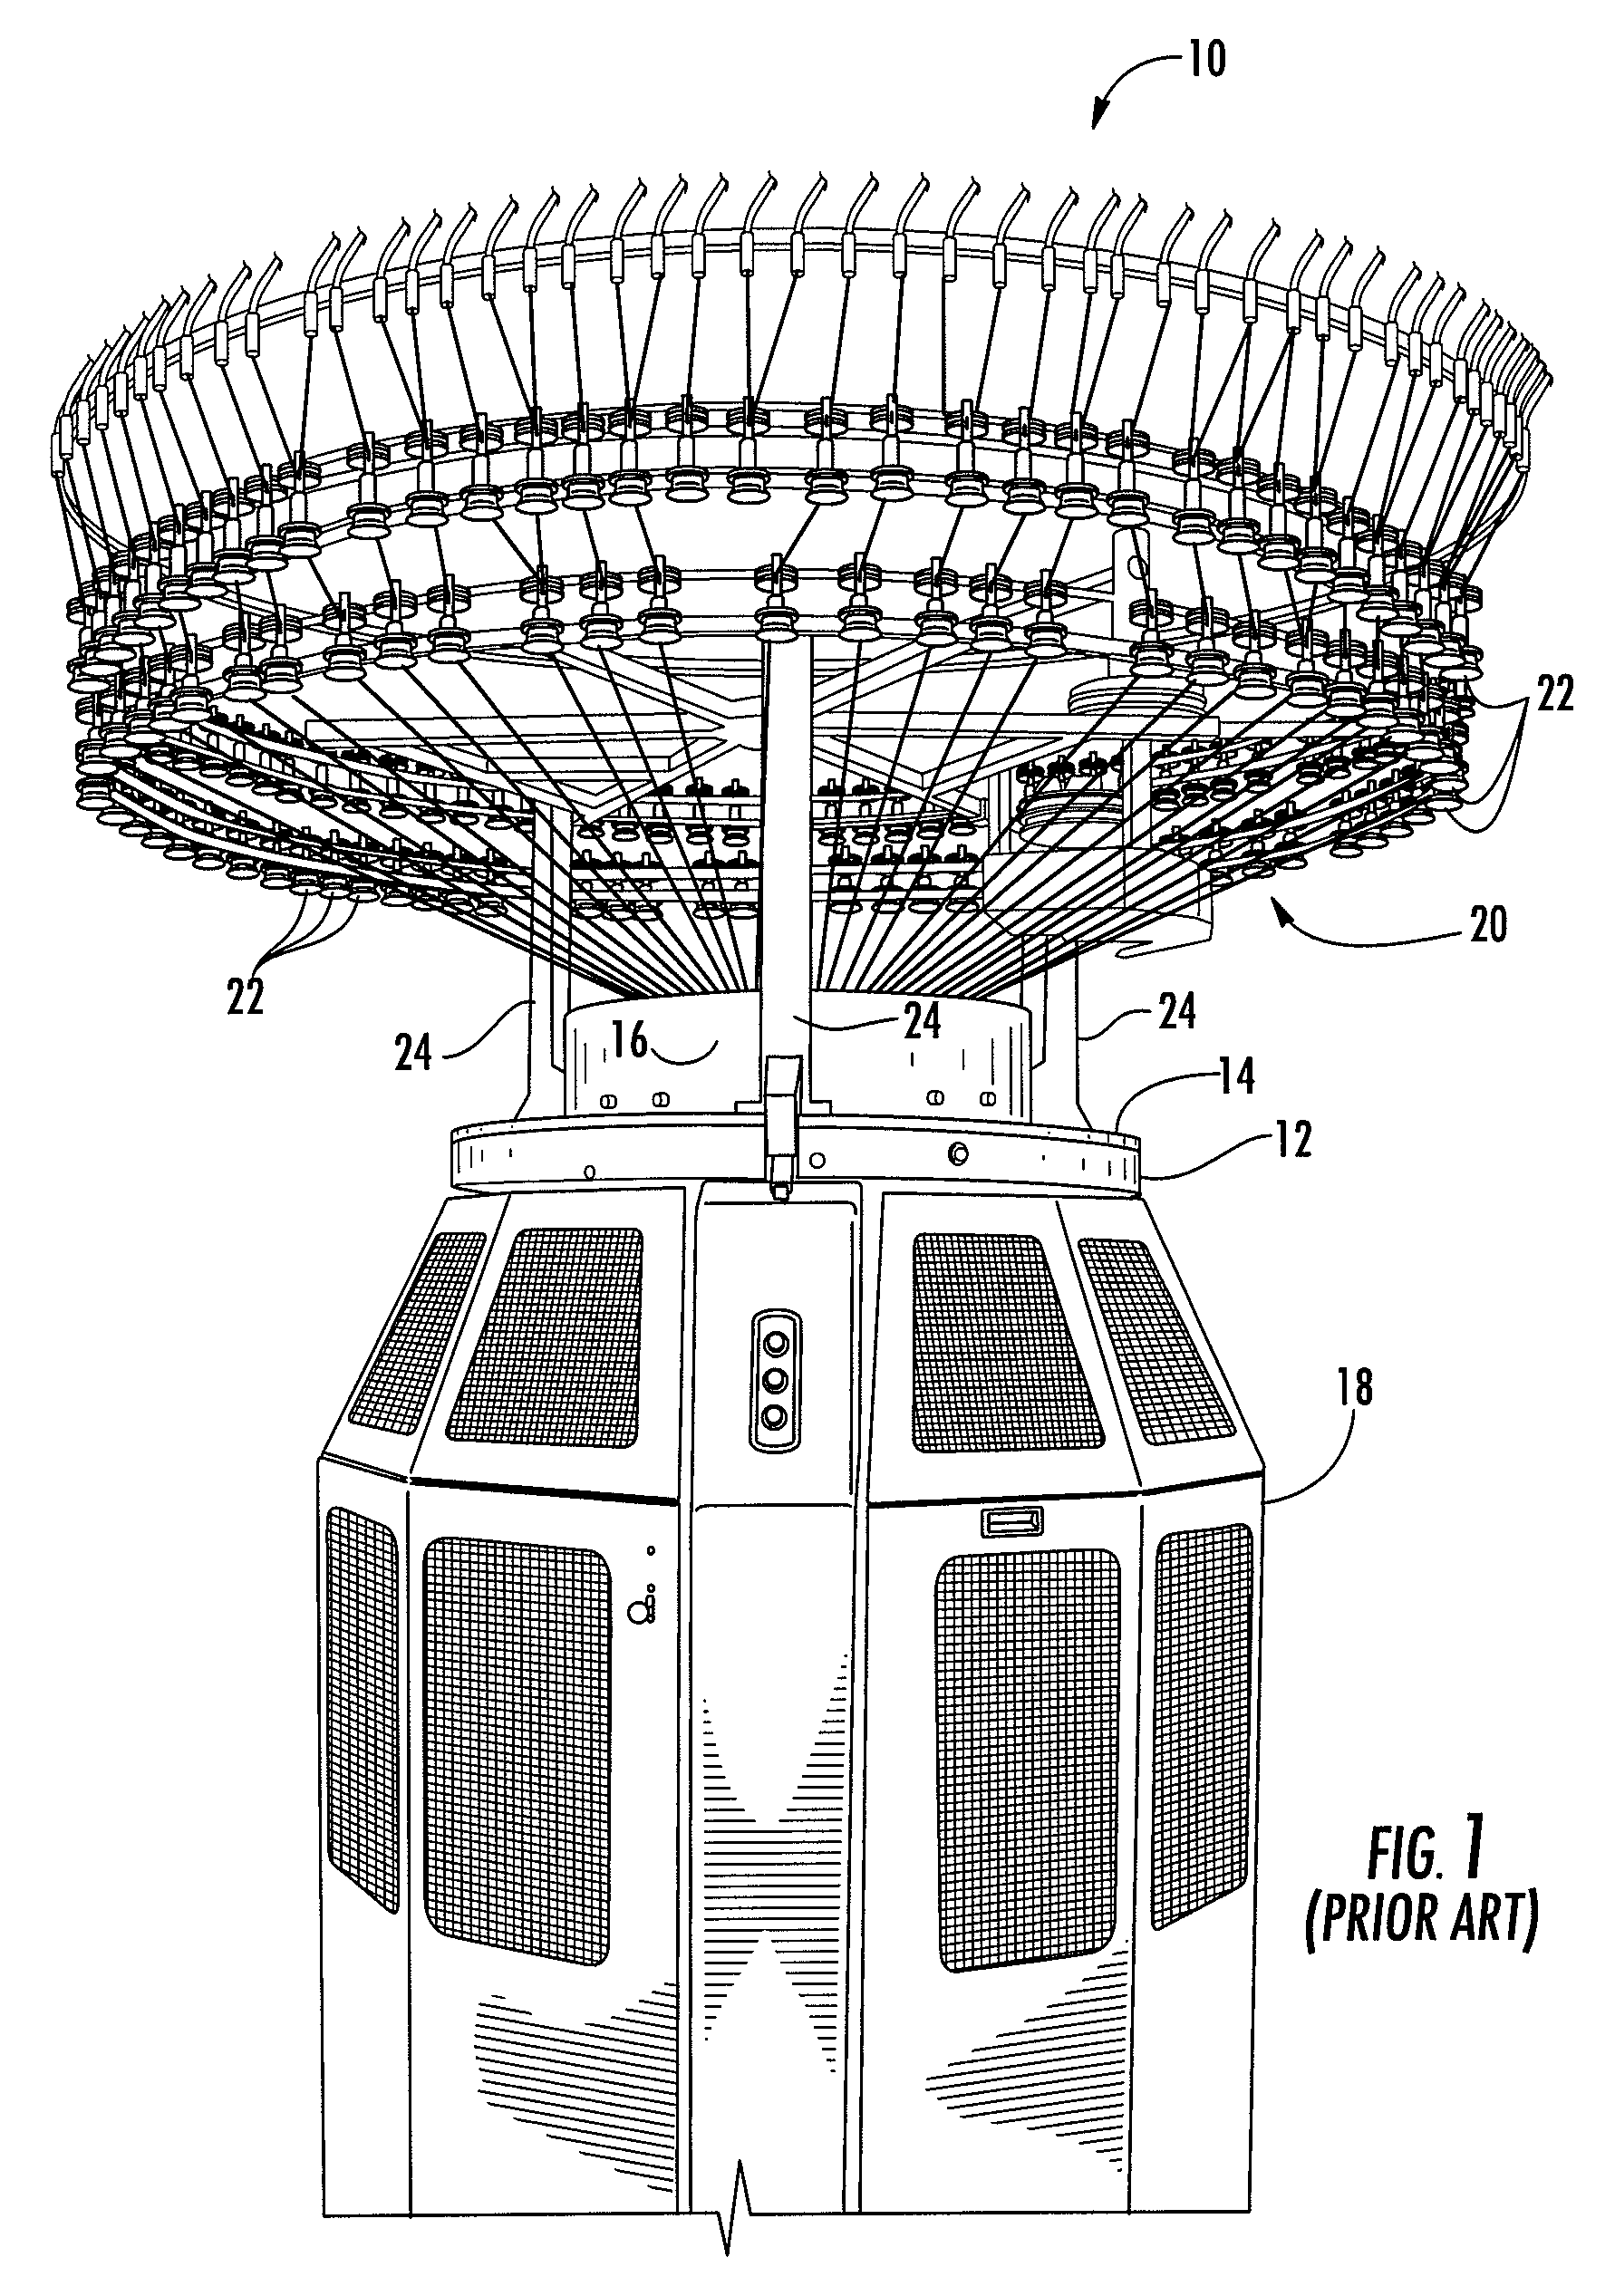 Circular knitting-machine chassis with cantilever support